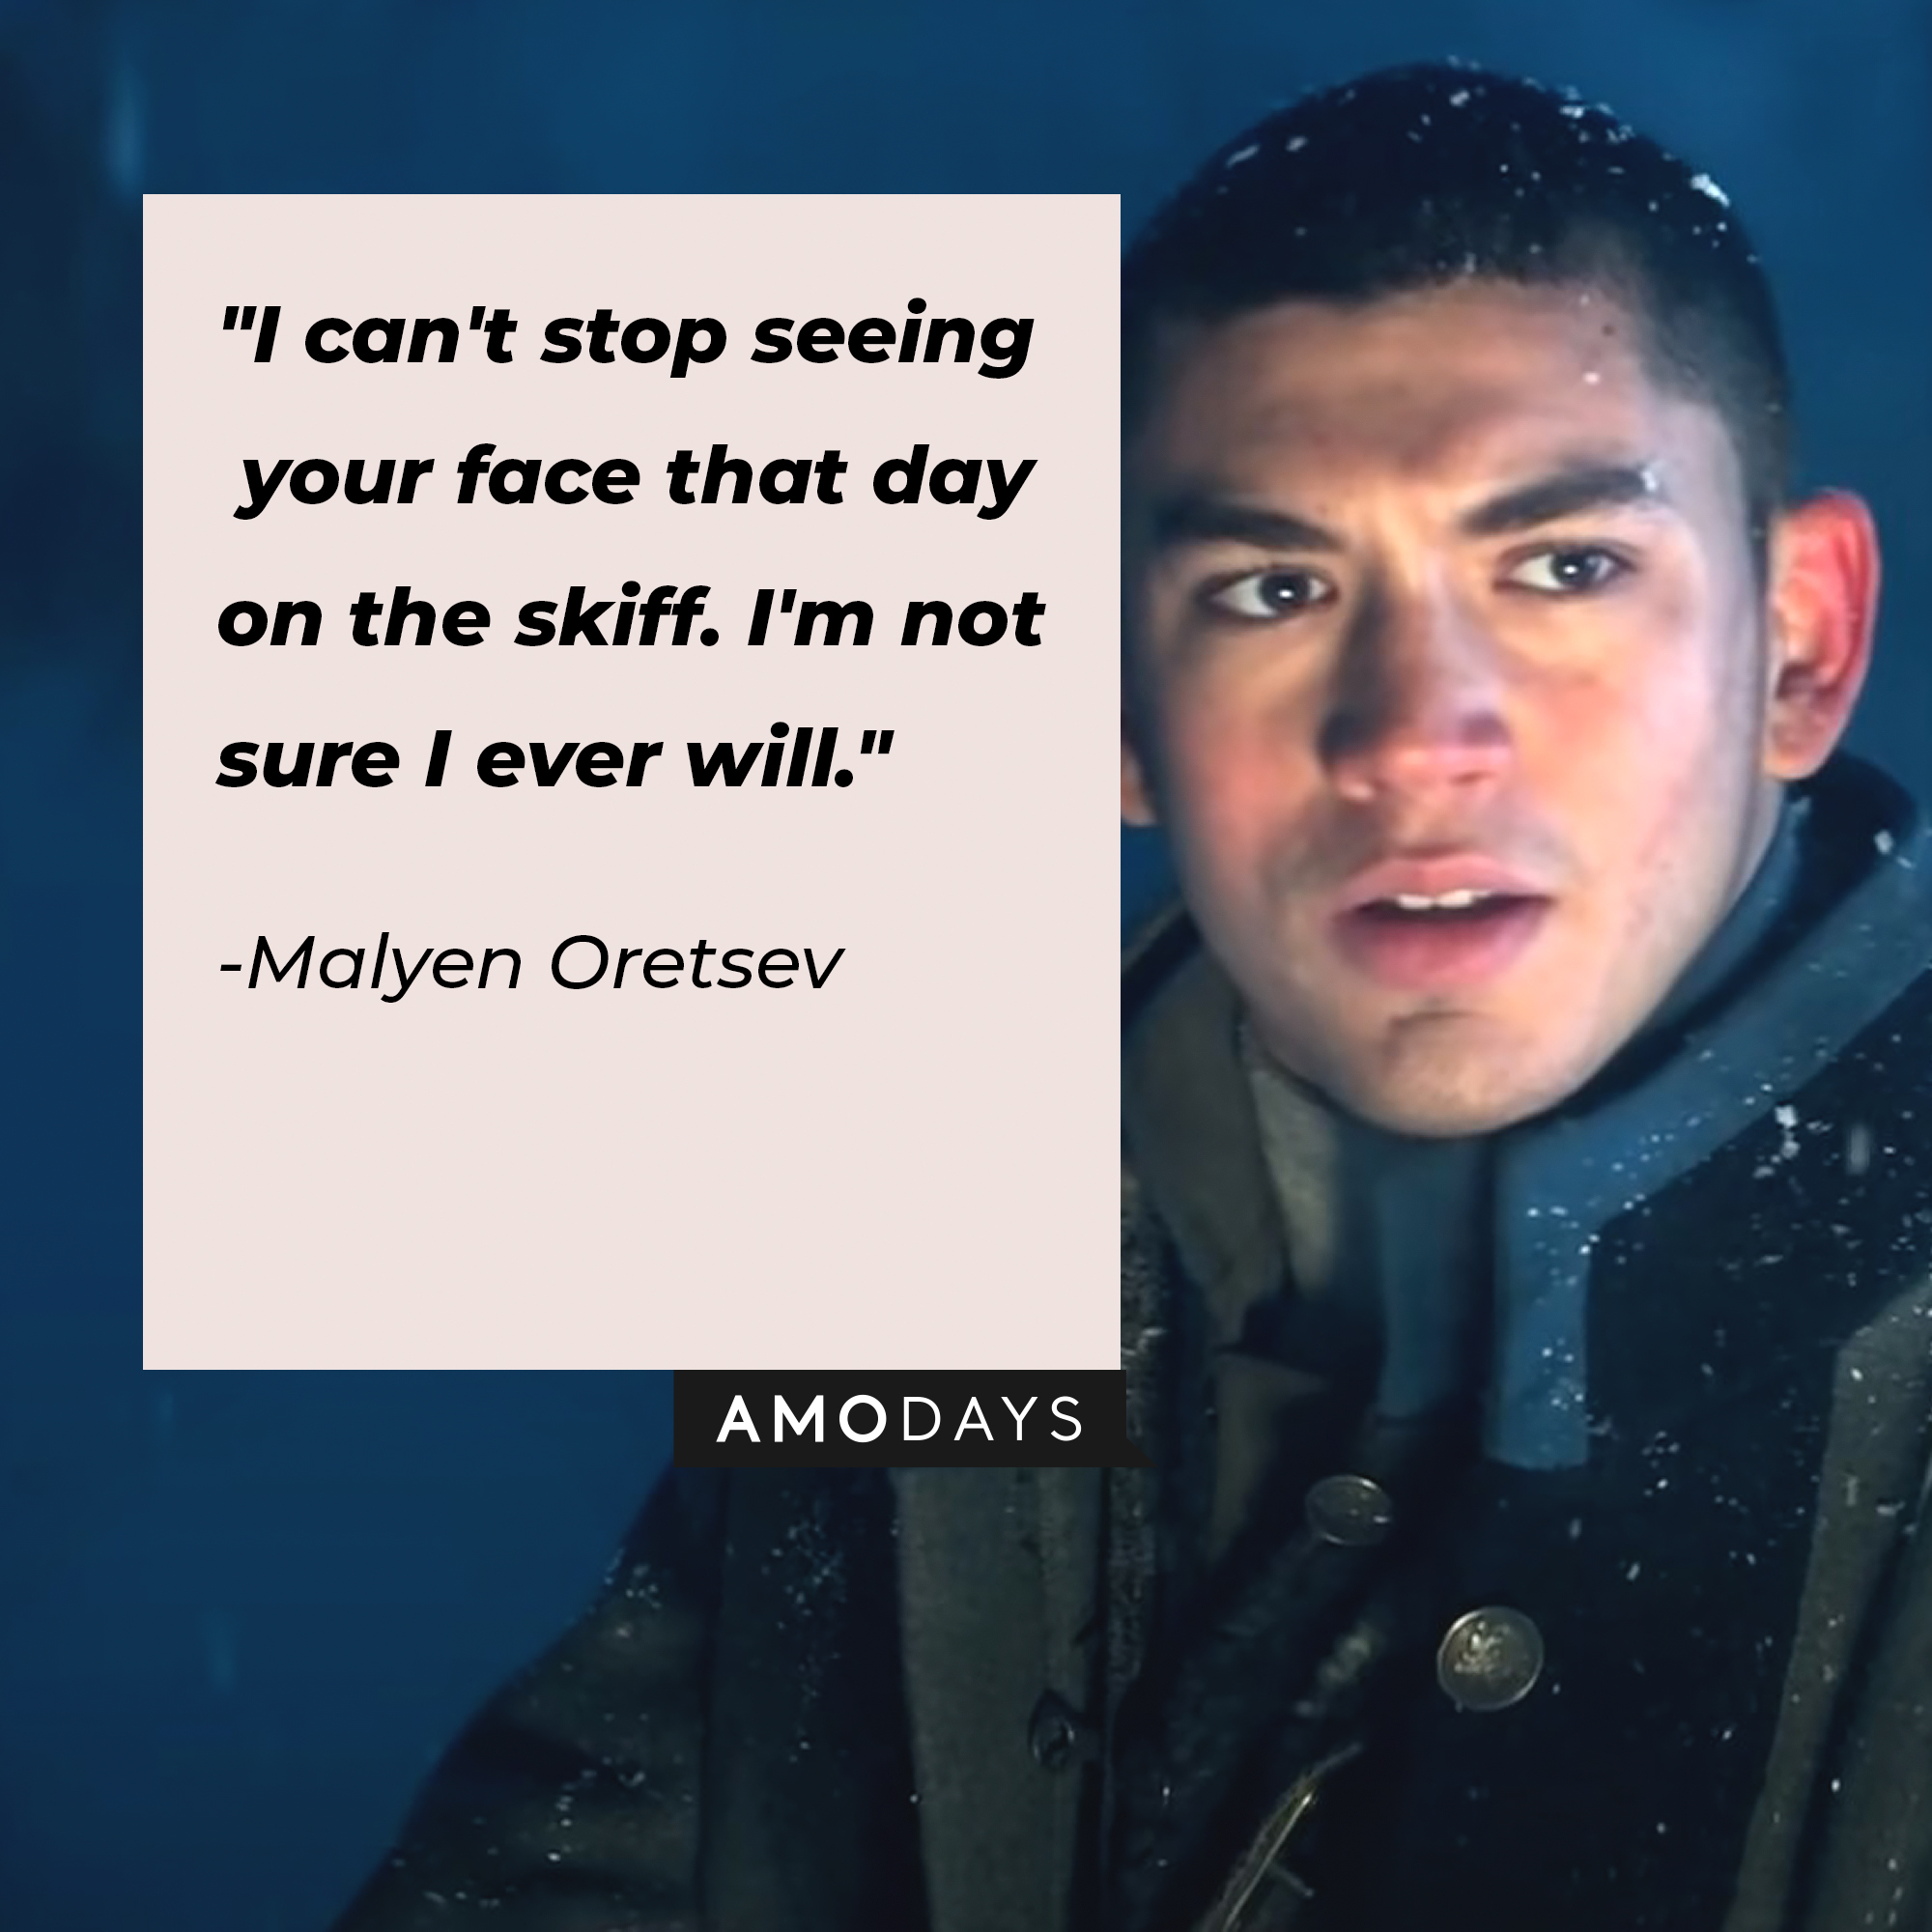 Malyen Oretsev's quote: "I can't stop seeing your face that day on the skiff. I'm not sure I ever will." | Image: AmoDays